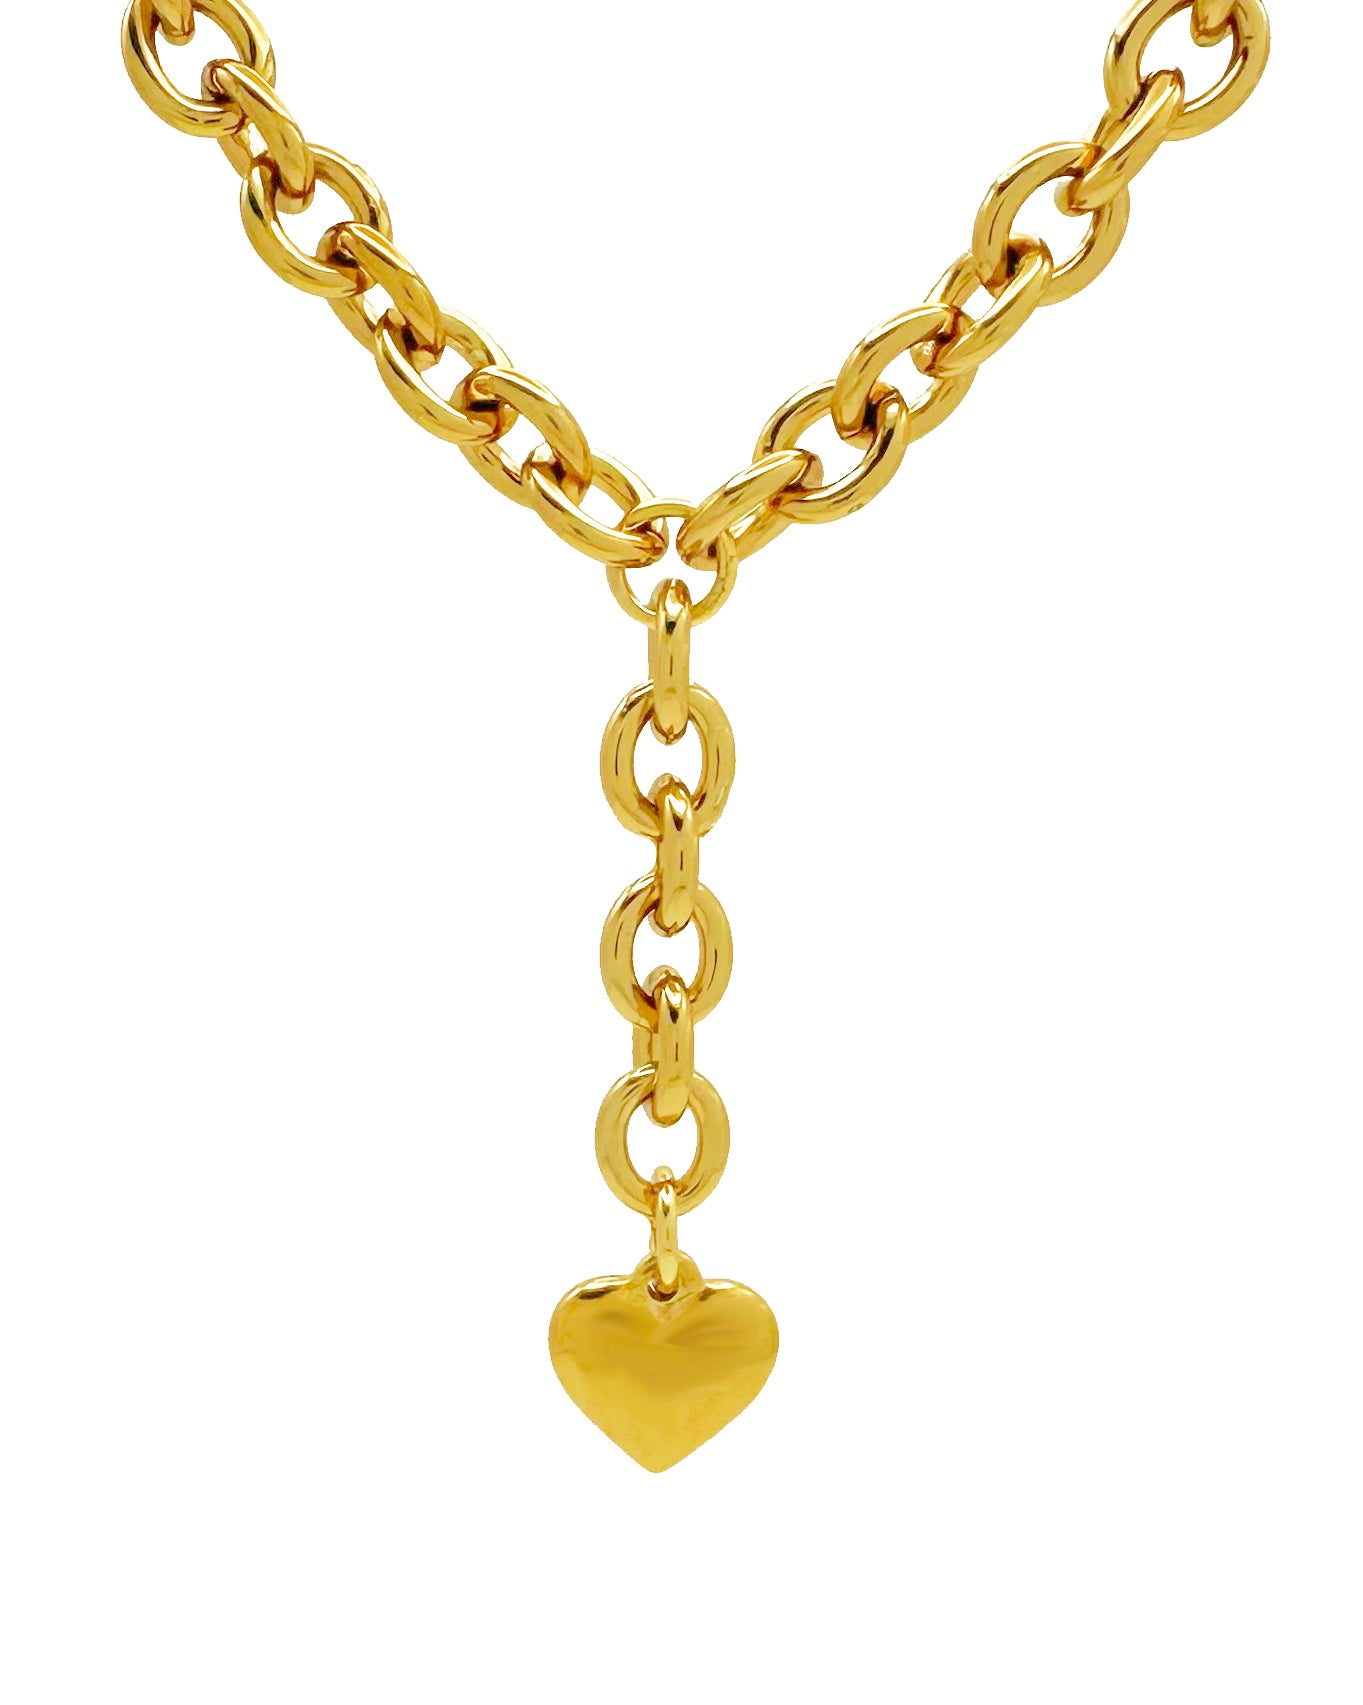 HEART LARIAT NECKLACE - GOLD